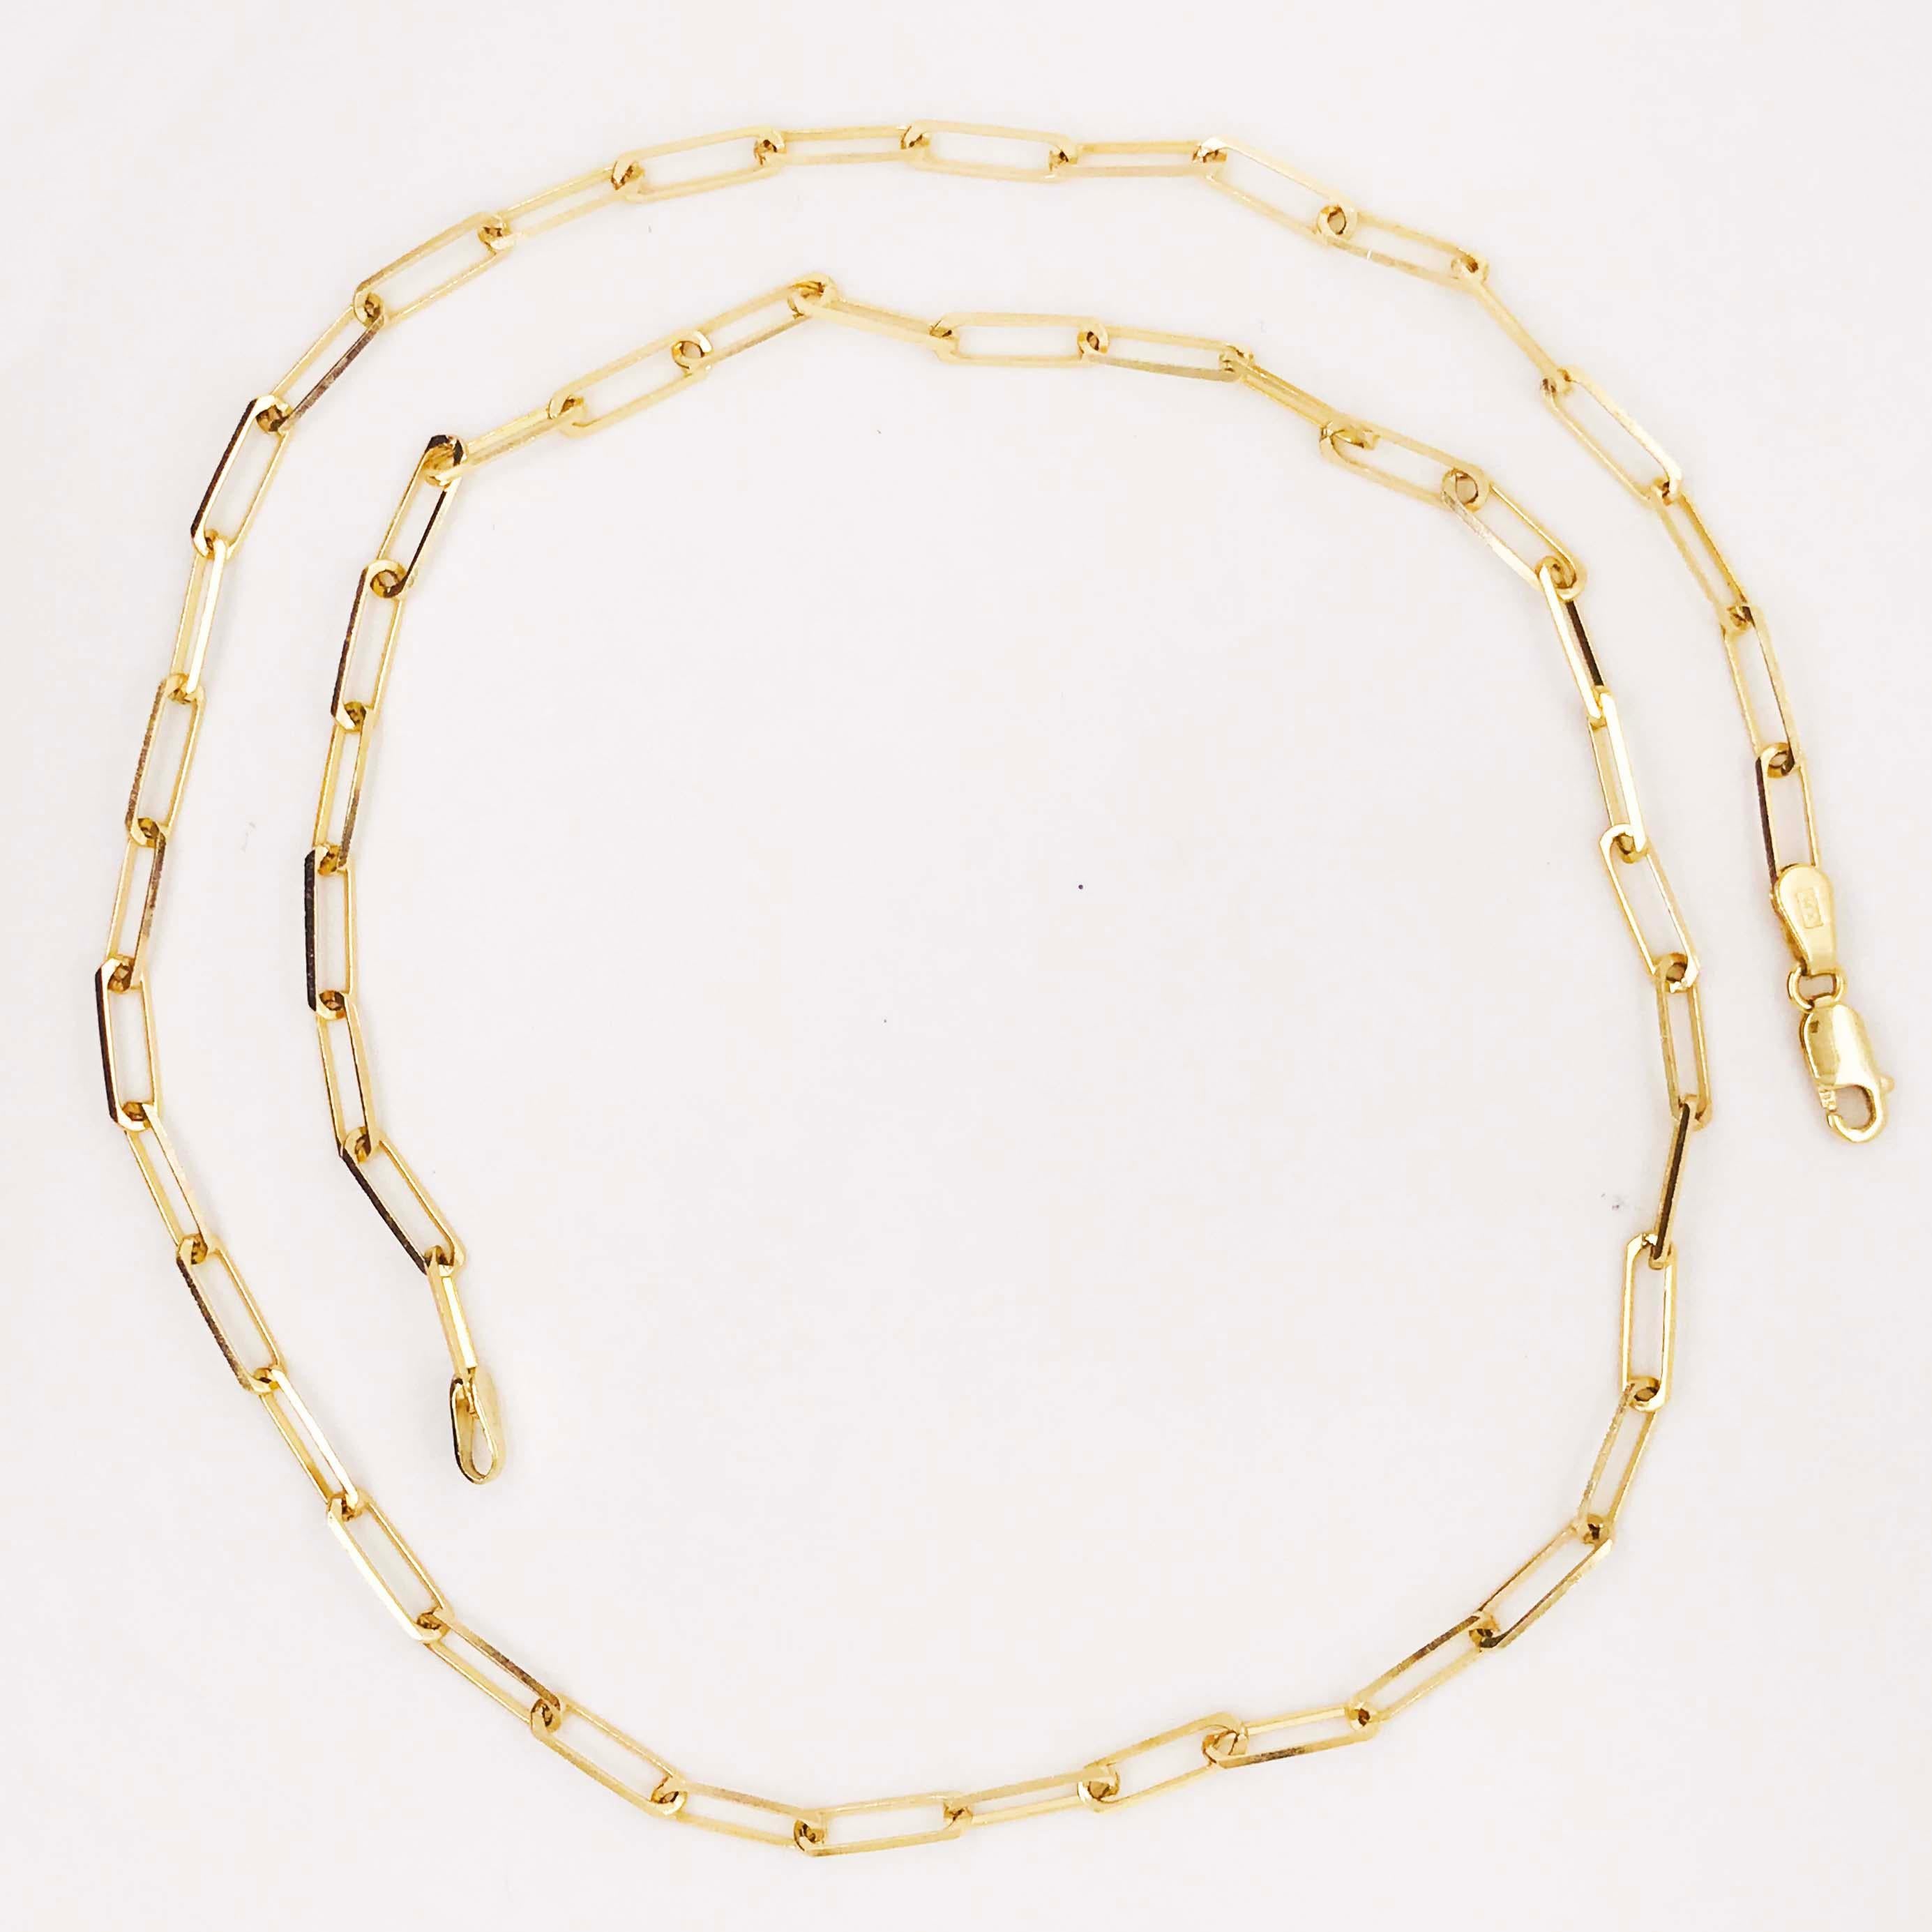 Paperclip Link Chain Necklace in 14 Karat Yellow Gold, 14 Karat Paperclip 7